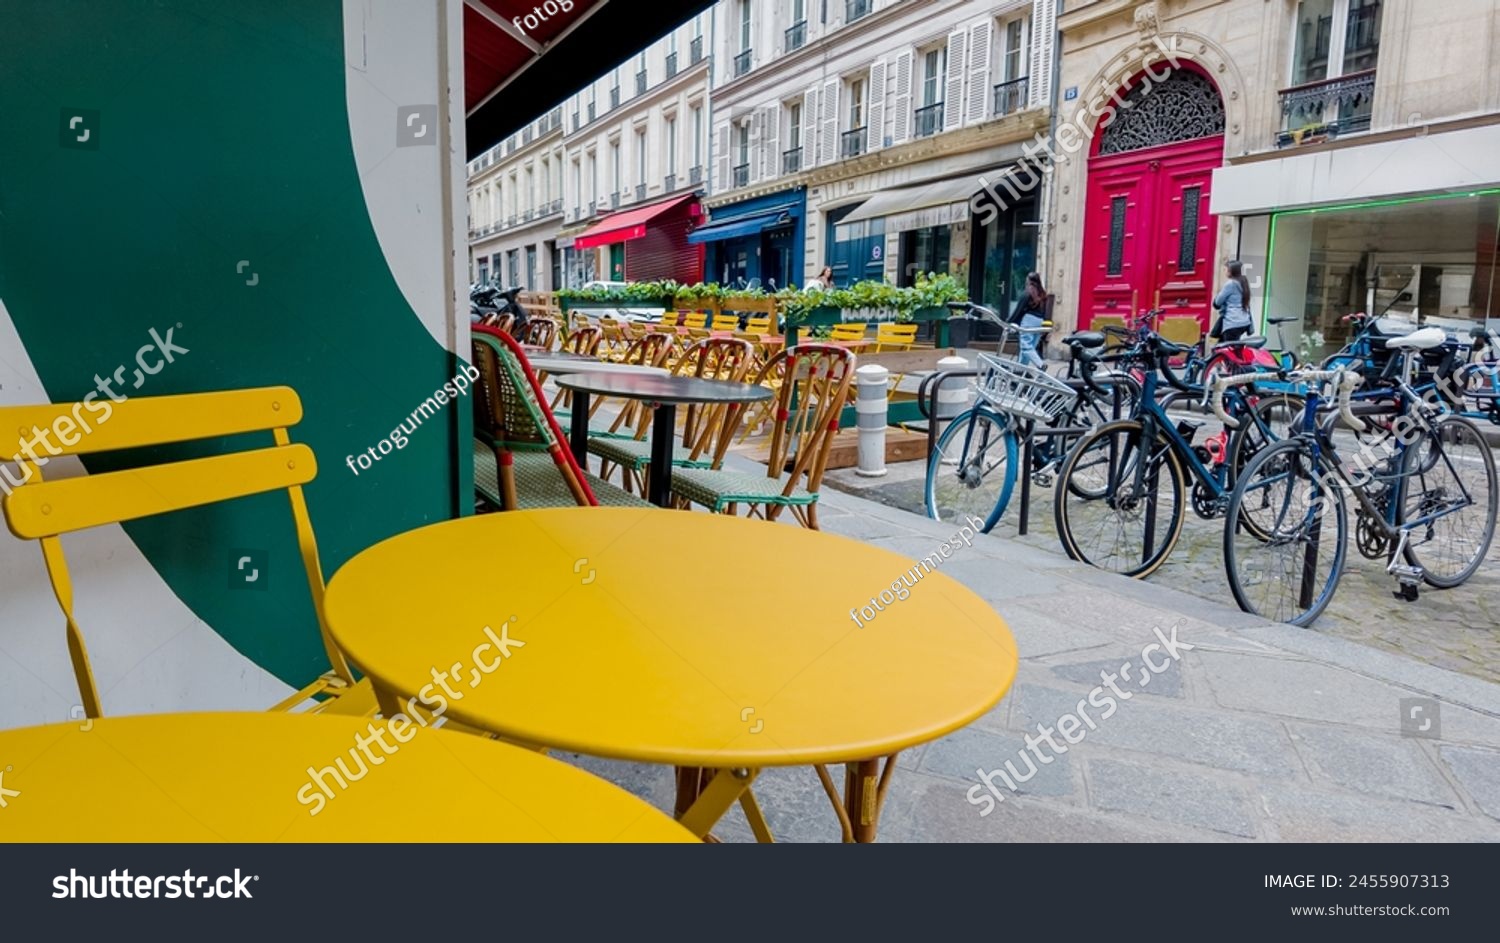 Colorful sidewalk cafe setting with yellow tables and chairs on a European city street, suggesting urban lifestyle and al fresco dining concepts #2455907313